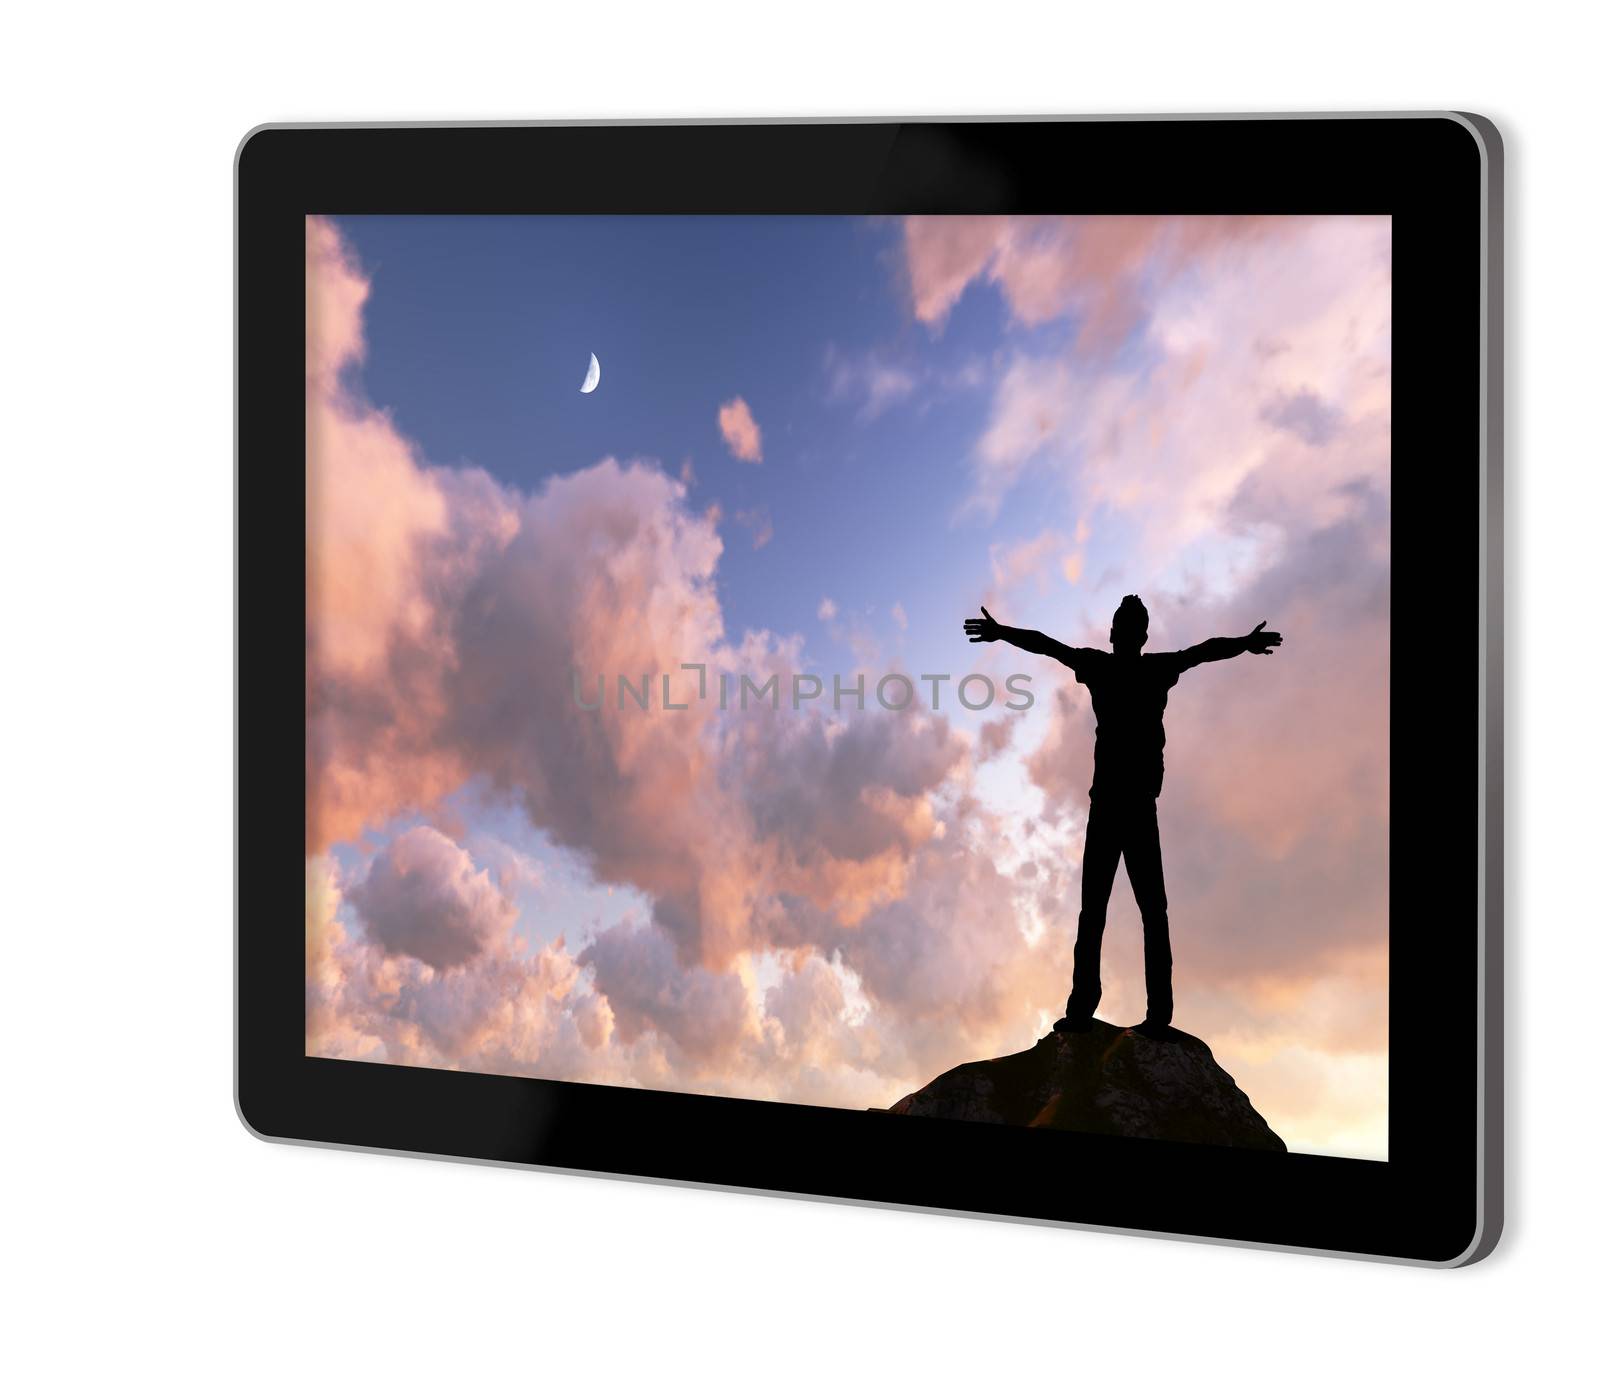 man' s silhouette with her hands raised in the sunset show  on tablet